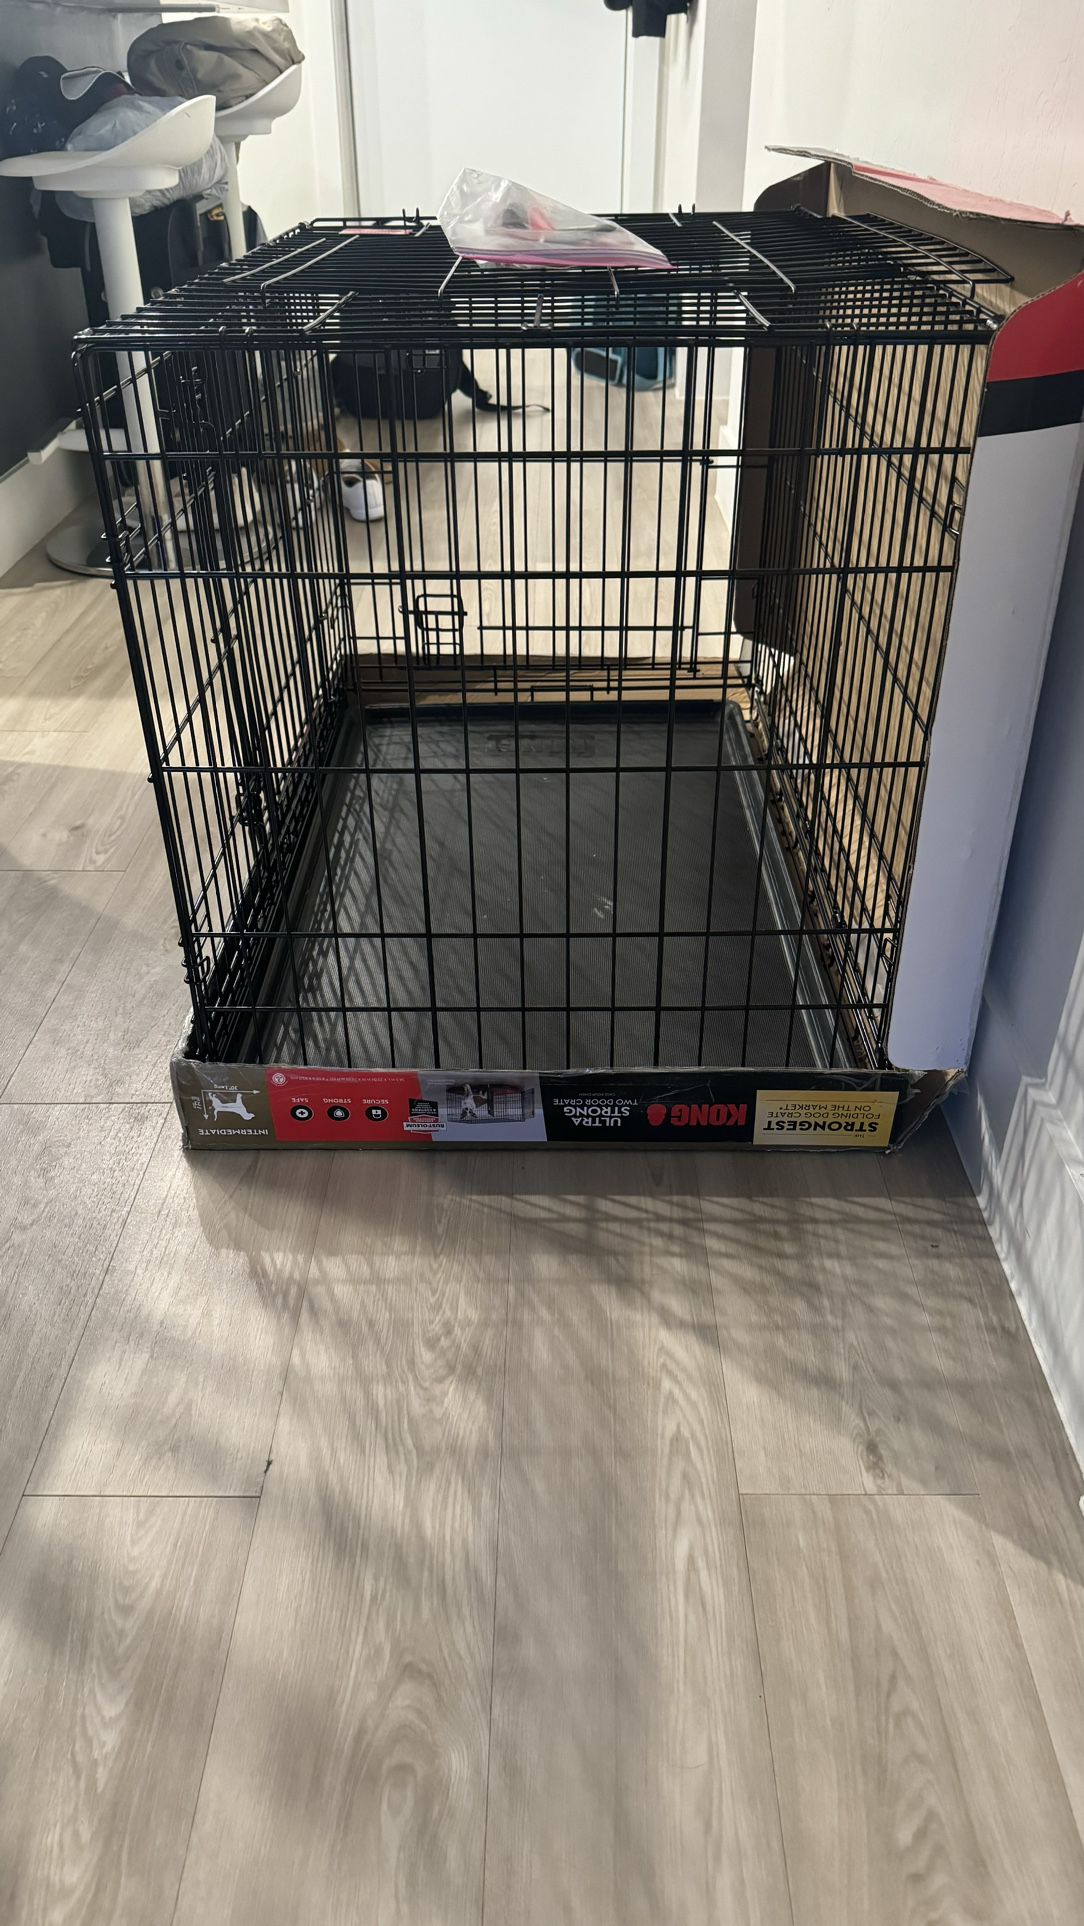 KONG Ultra-Strong Double Door Wire Dog Crate with Divider Panel